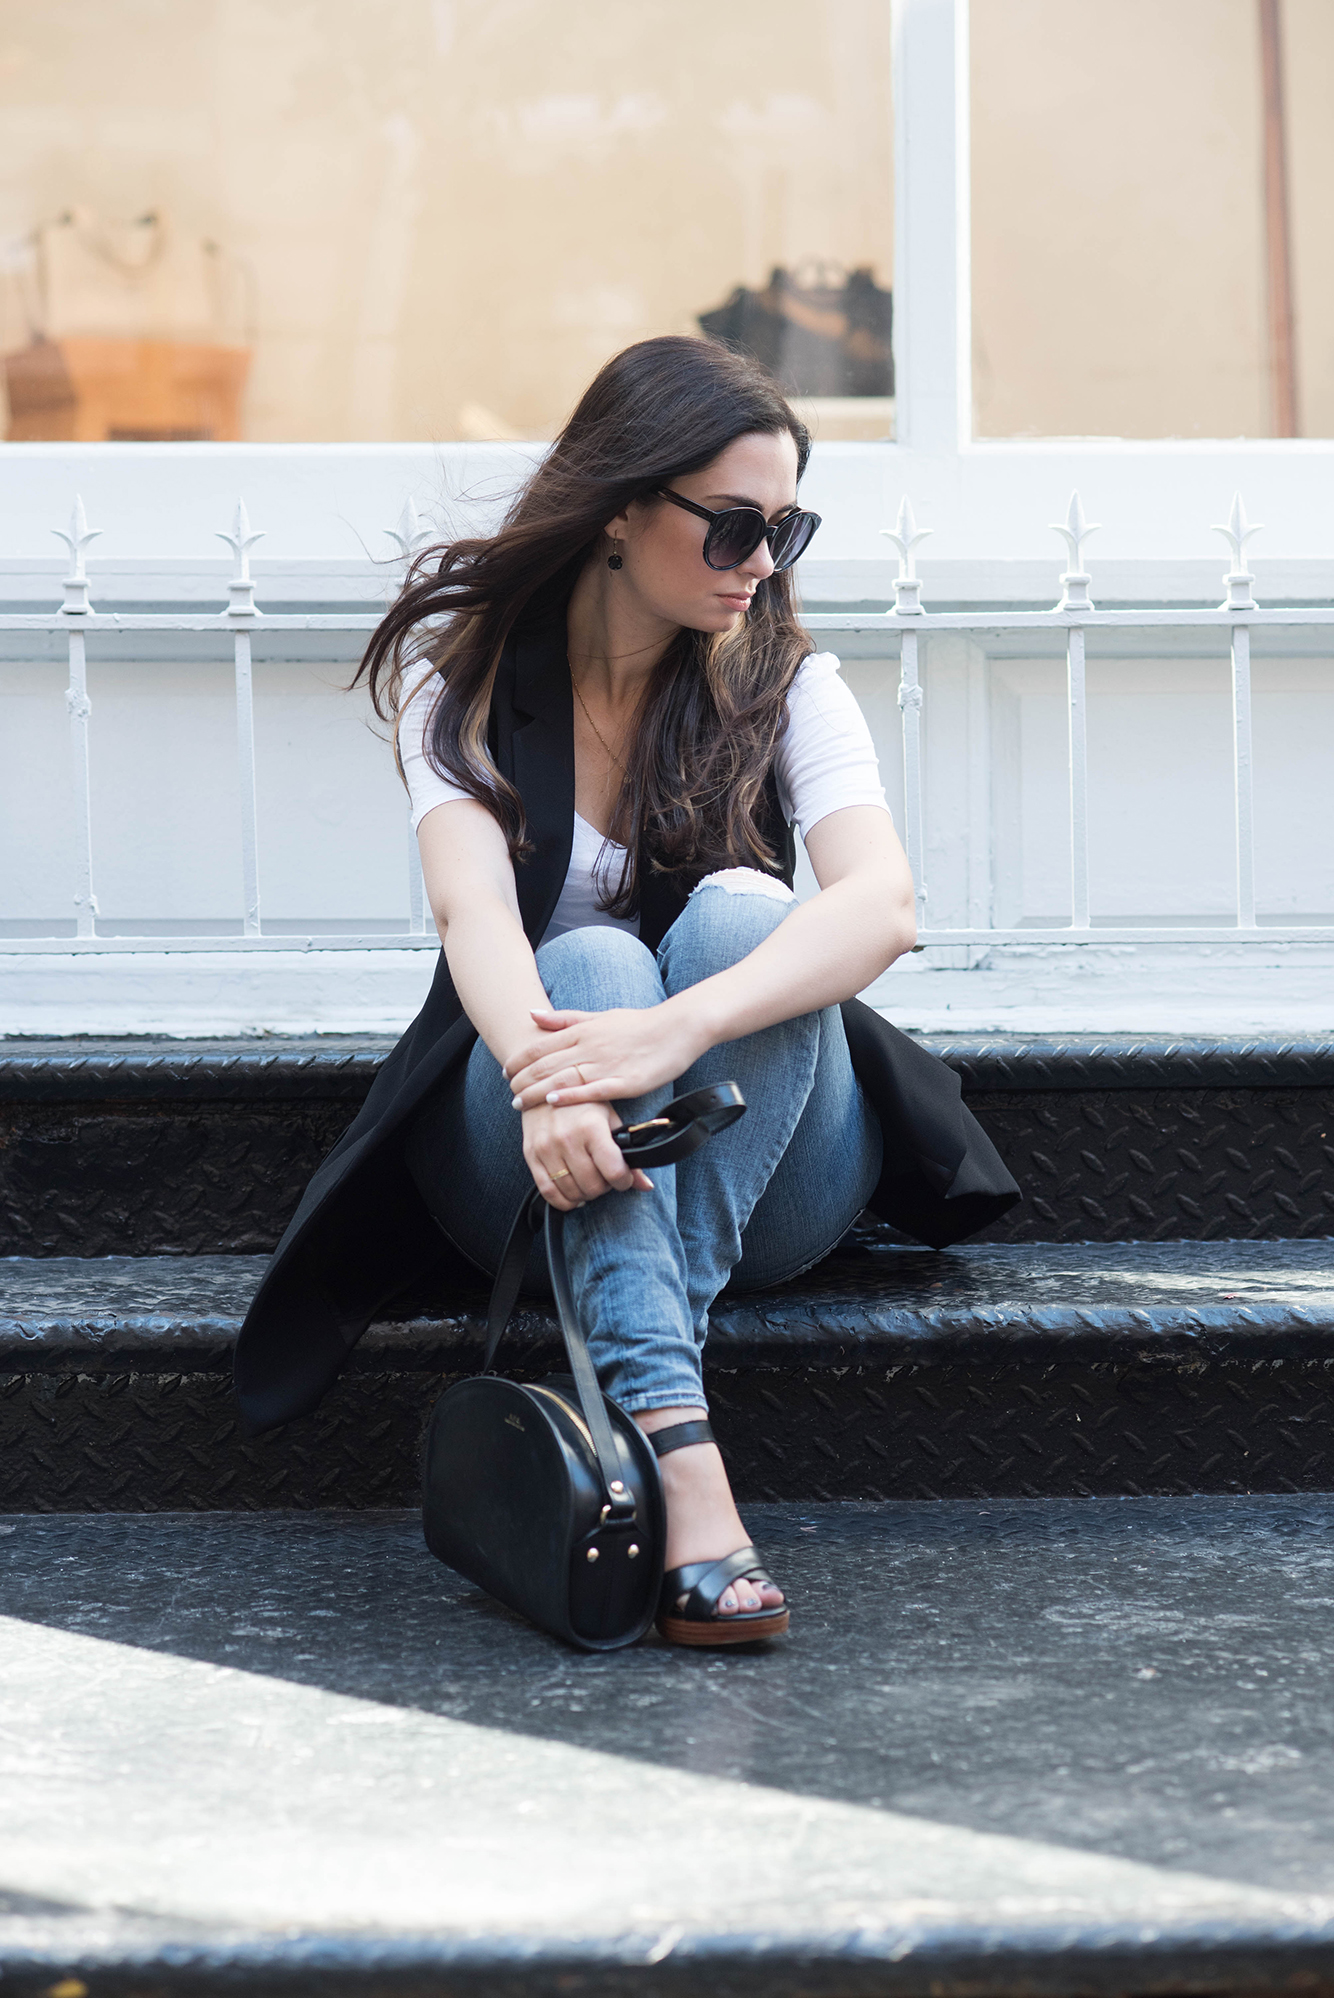 coco-and-vera-best-vancouver-fashion-blog-best-canadian-fashion-blog-top-blogger-street-style-revolve-me-zara-waistcoat-aritzia-tee-lovers-and-friends-jeans-le-chateau-sandals-apc-halfmoon-bag